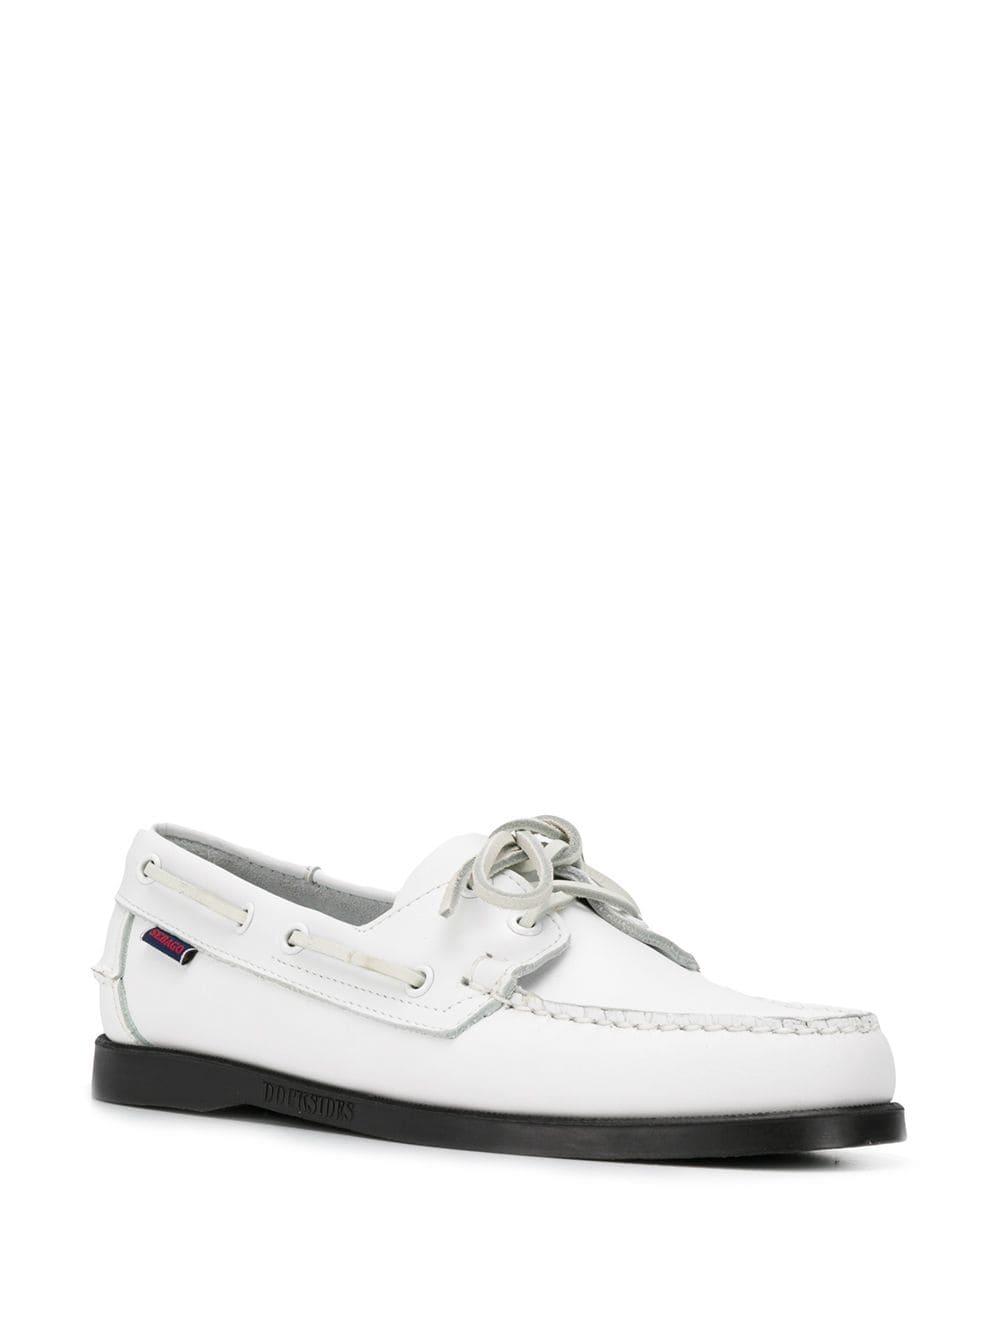 Sebago Two Tone Boat Shoes in White for Men - Lyst